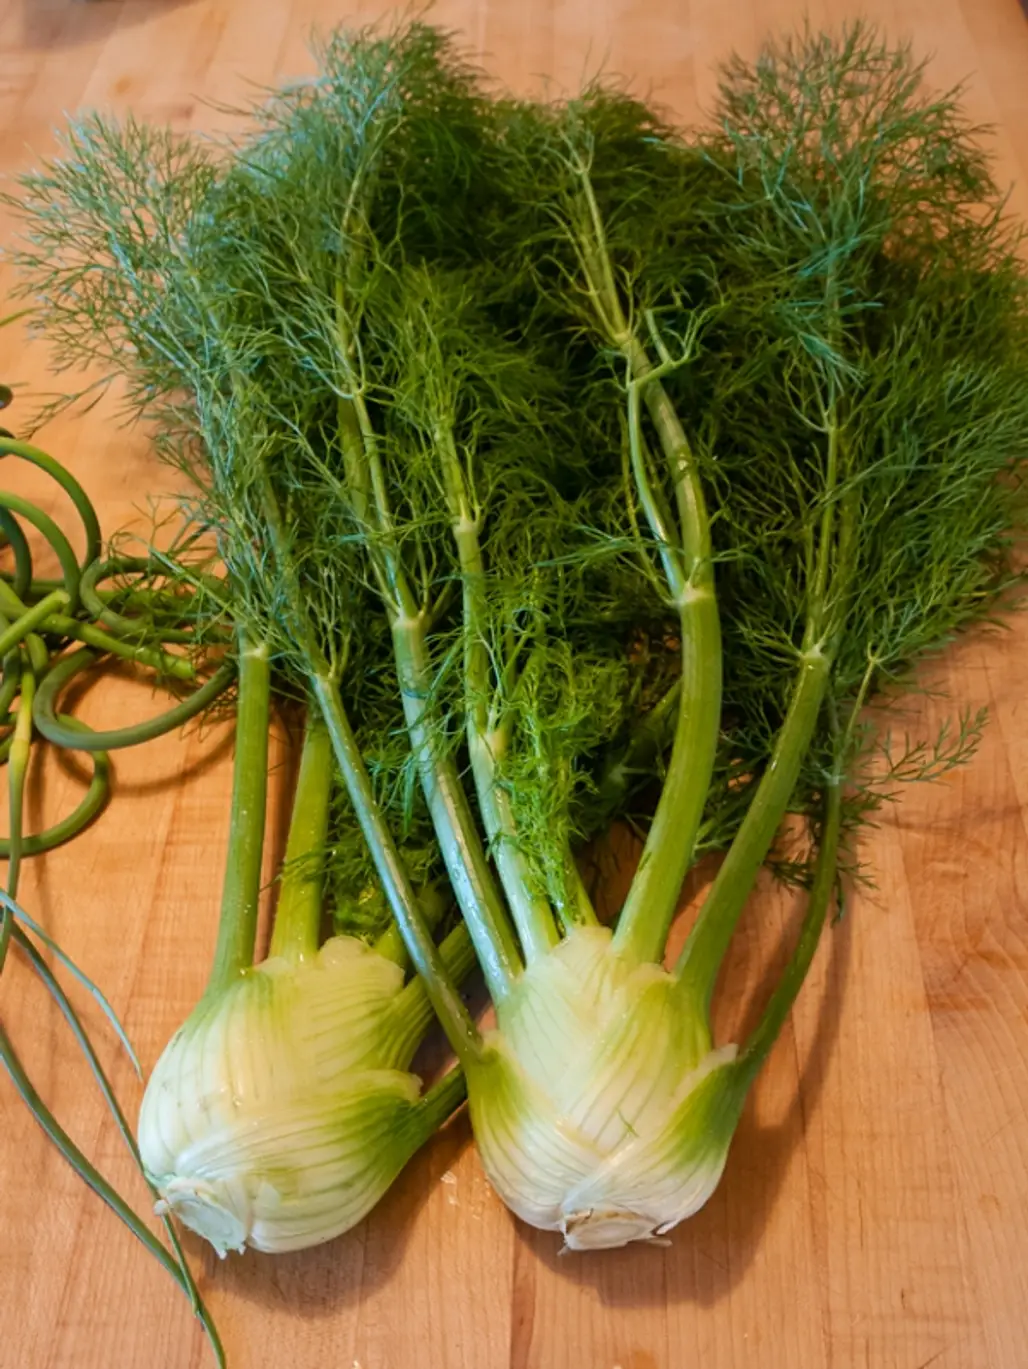 Chew Fennel and Anise after a Meal